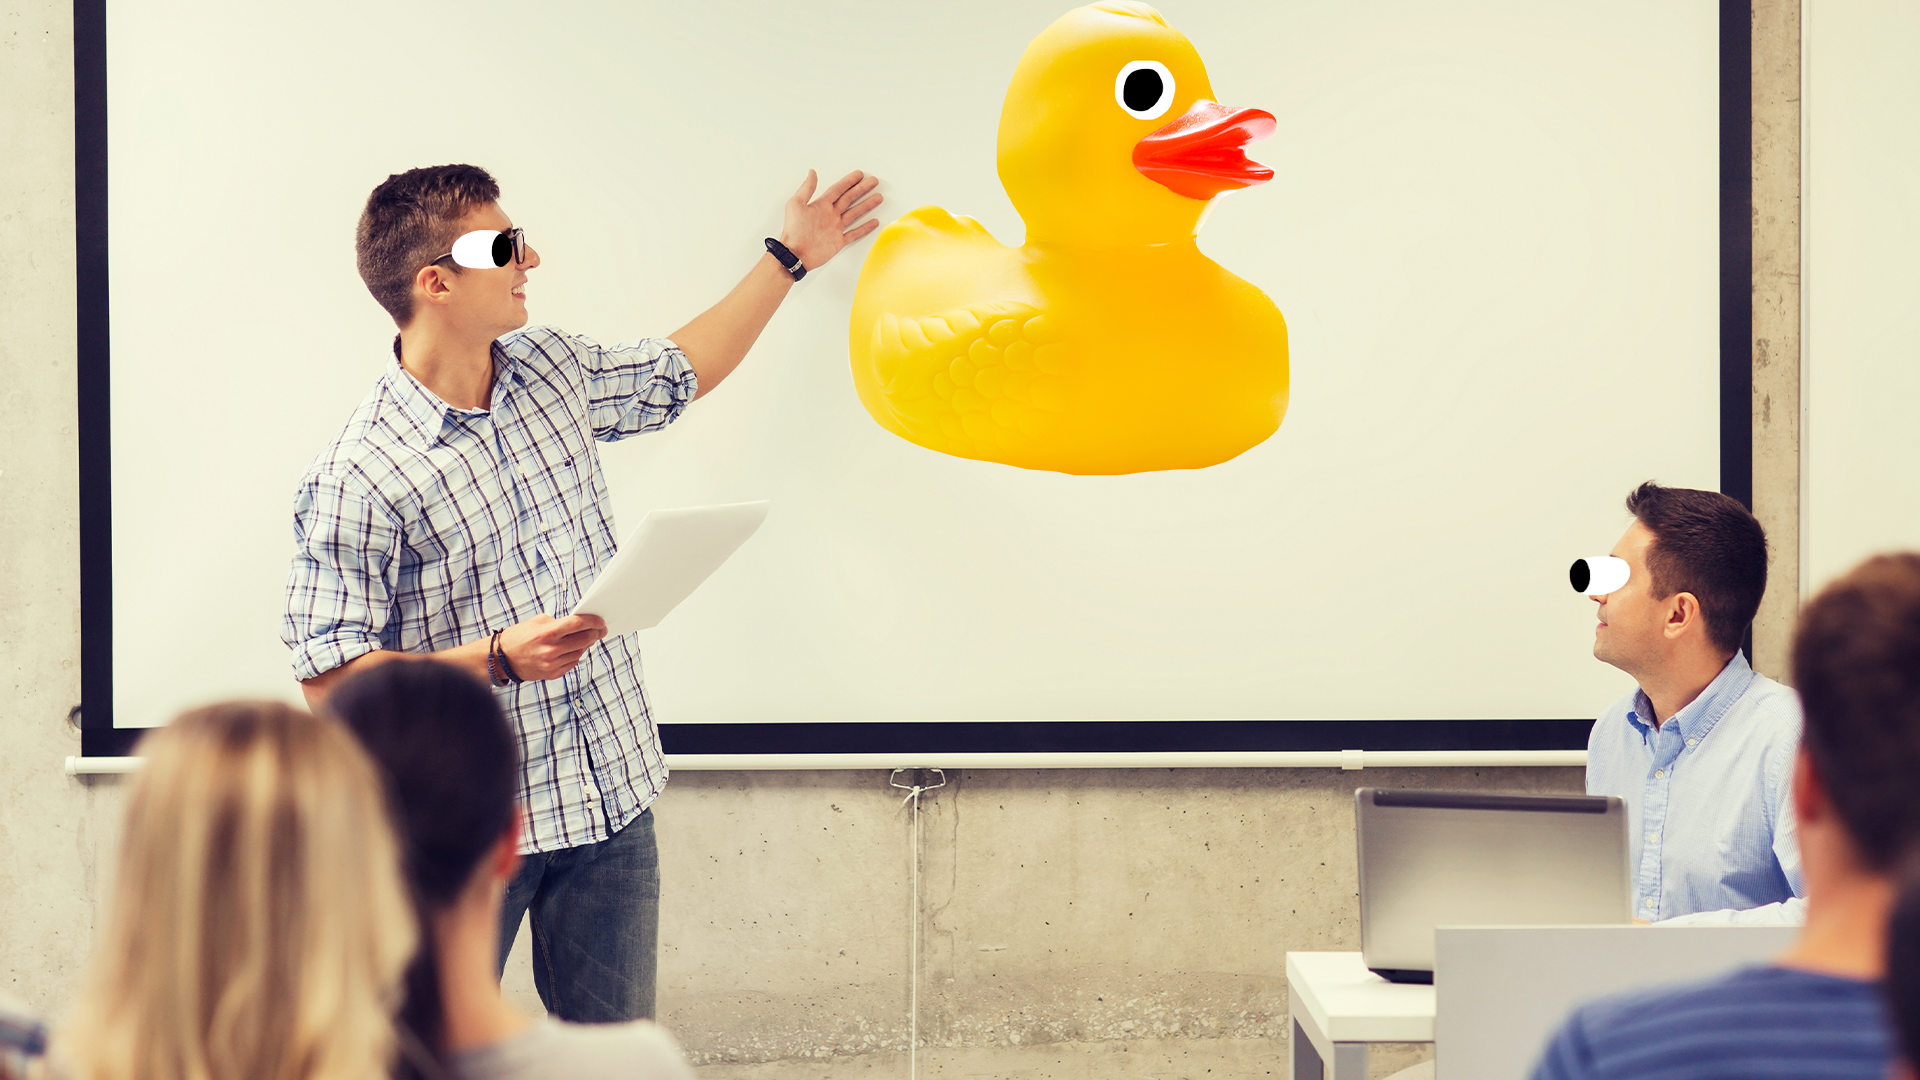 Guy giving presentation with goofy Beano rubber duck